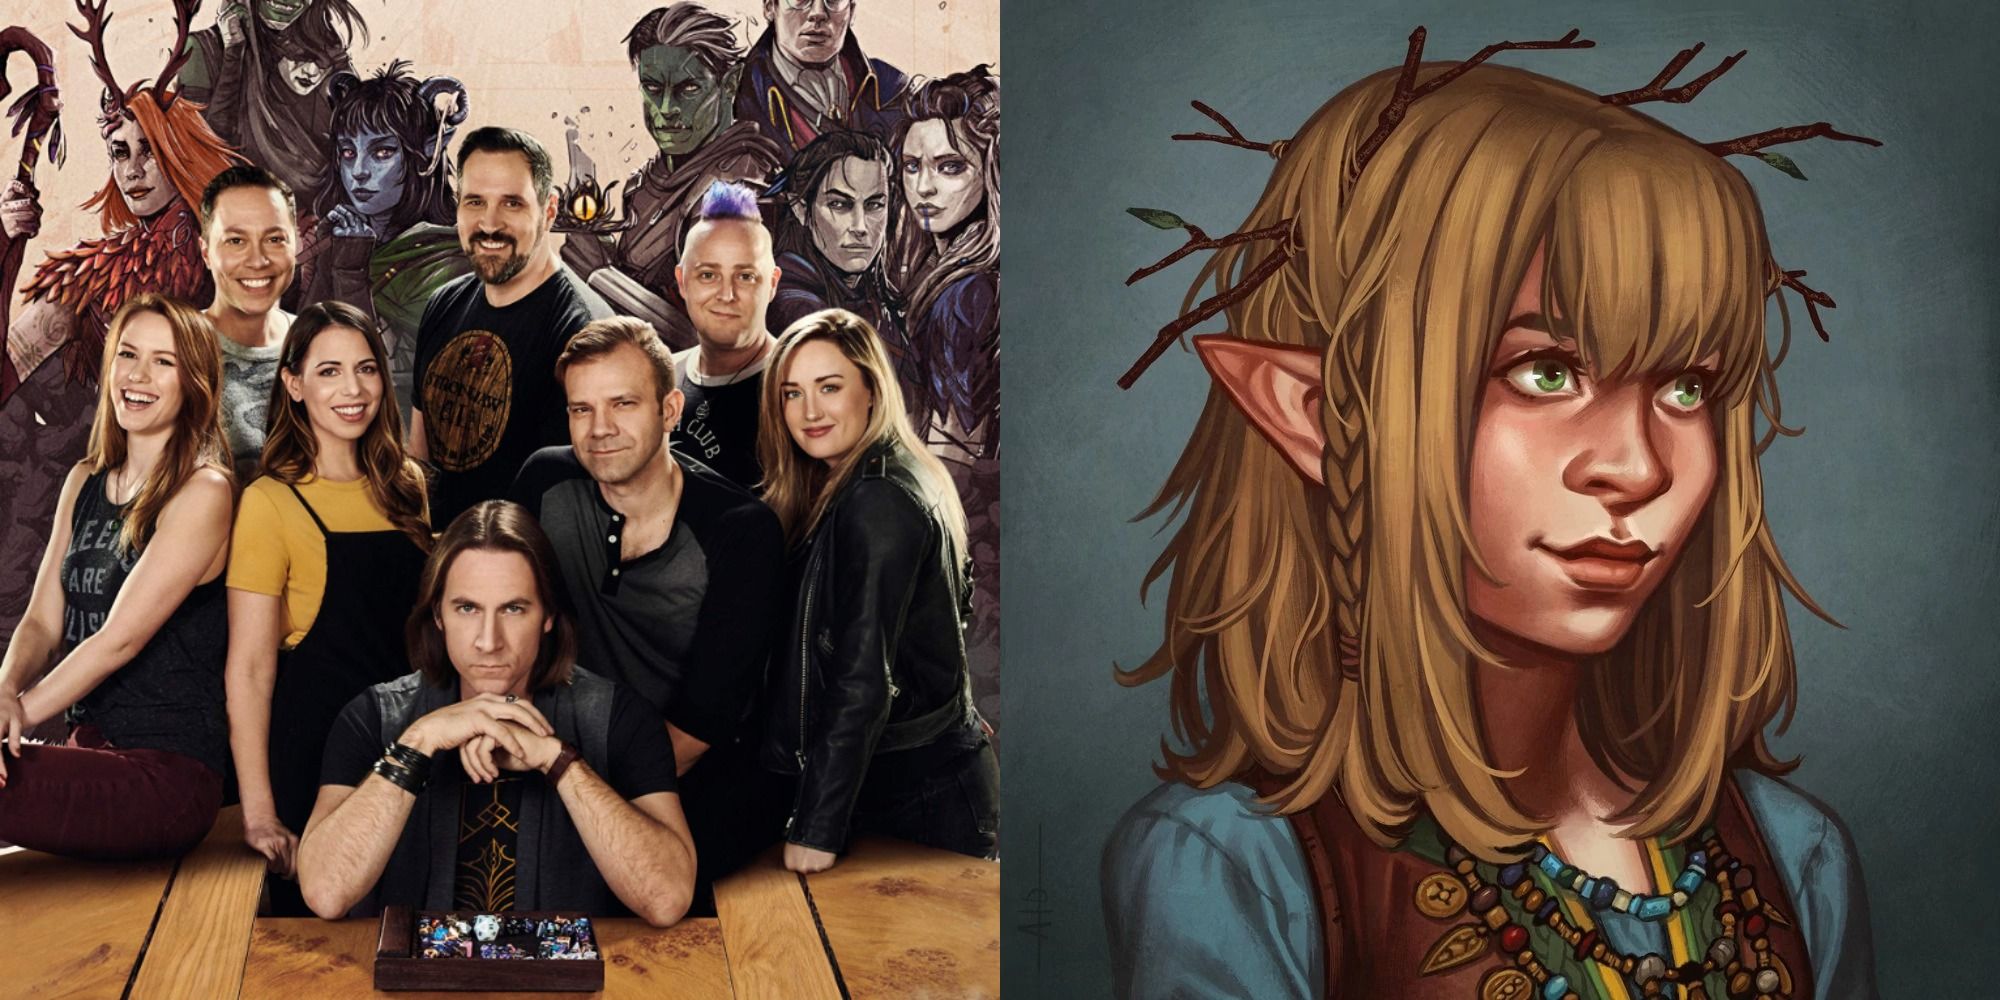 Split image showing the cast of Critical Role and Twiggy's portrait.